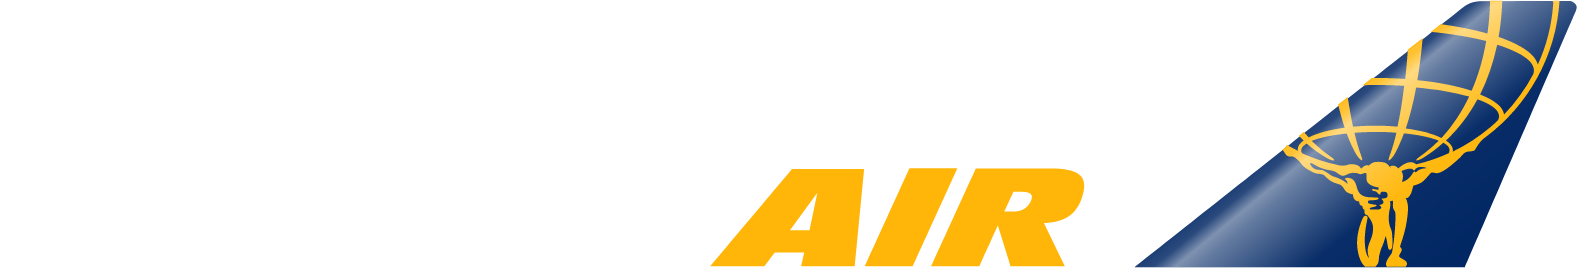 Atlas Air Worldwide Holdings logo large for dark backgrounds (transparent PNG)